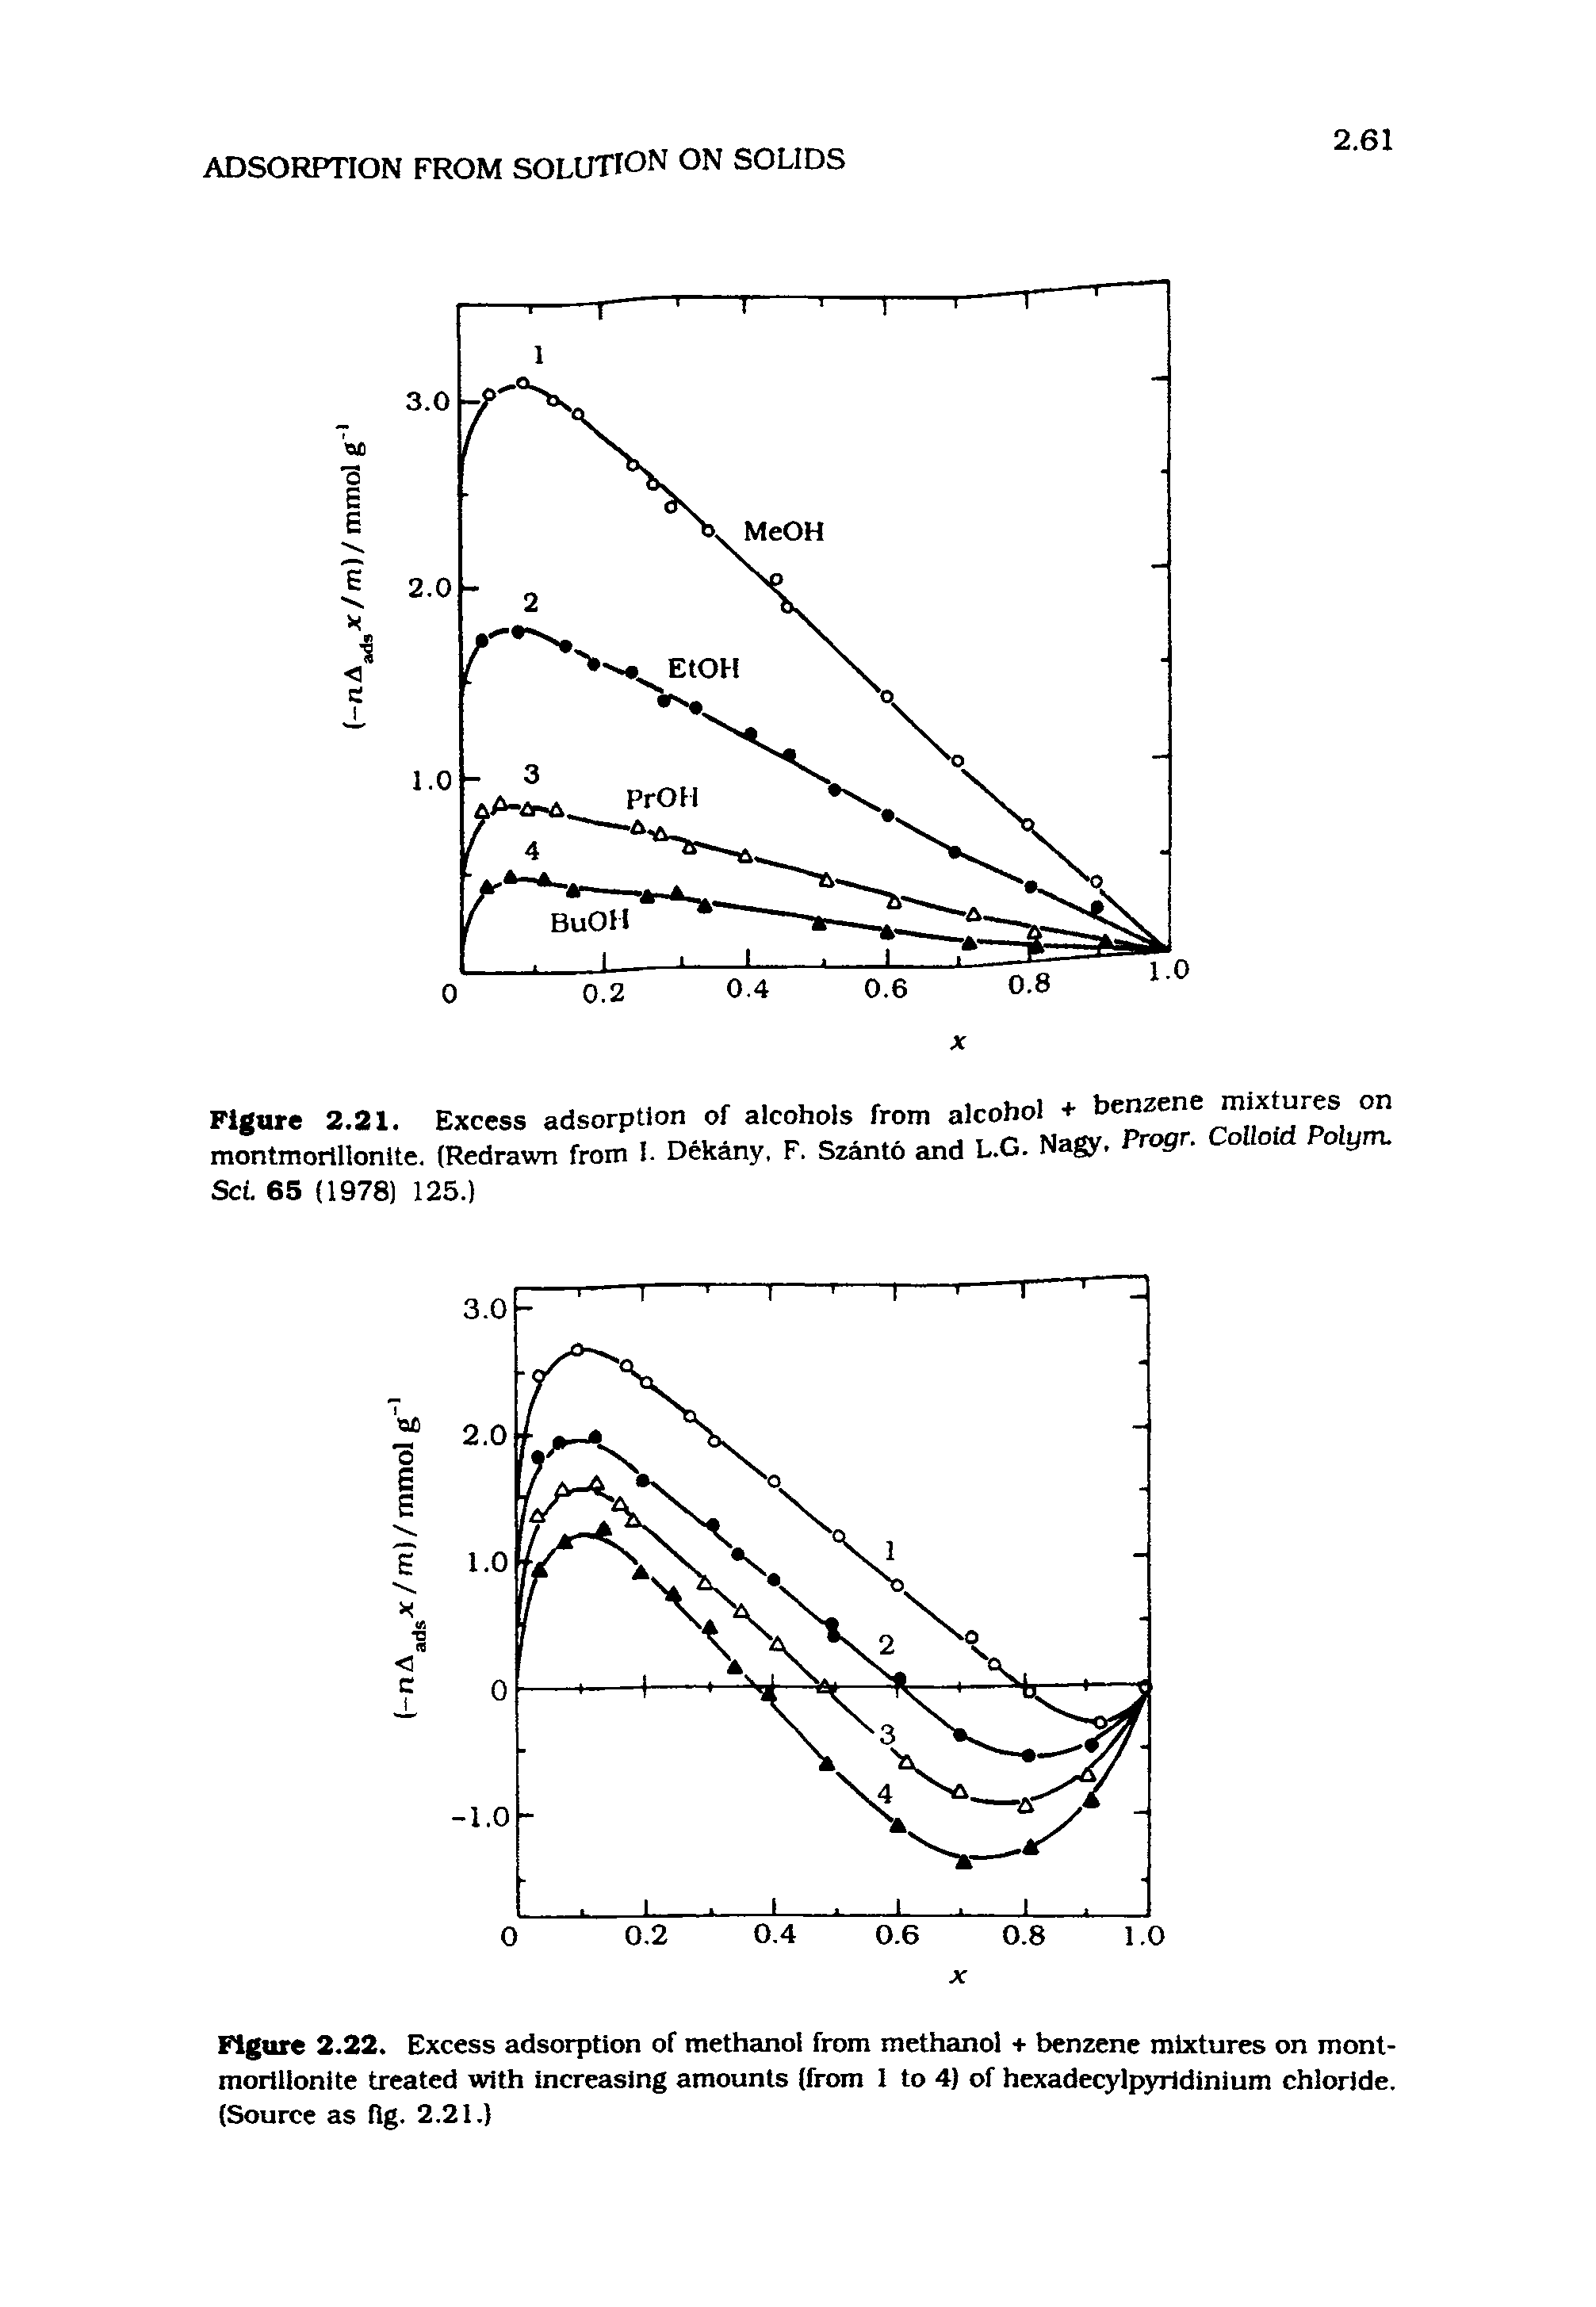 Figure 2.22. Excess adsorption of methanol from methanol + benzene mbctures on mont-mortllonite treated wnth increasing amounts (from I to 4) of hexadecylpyrldinium chloride. (Source as (Ig. 2.21.)...